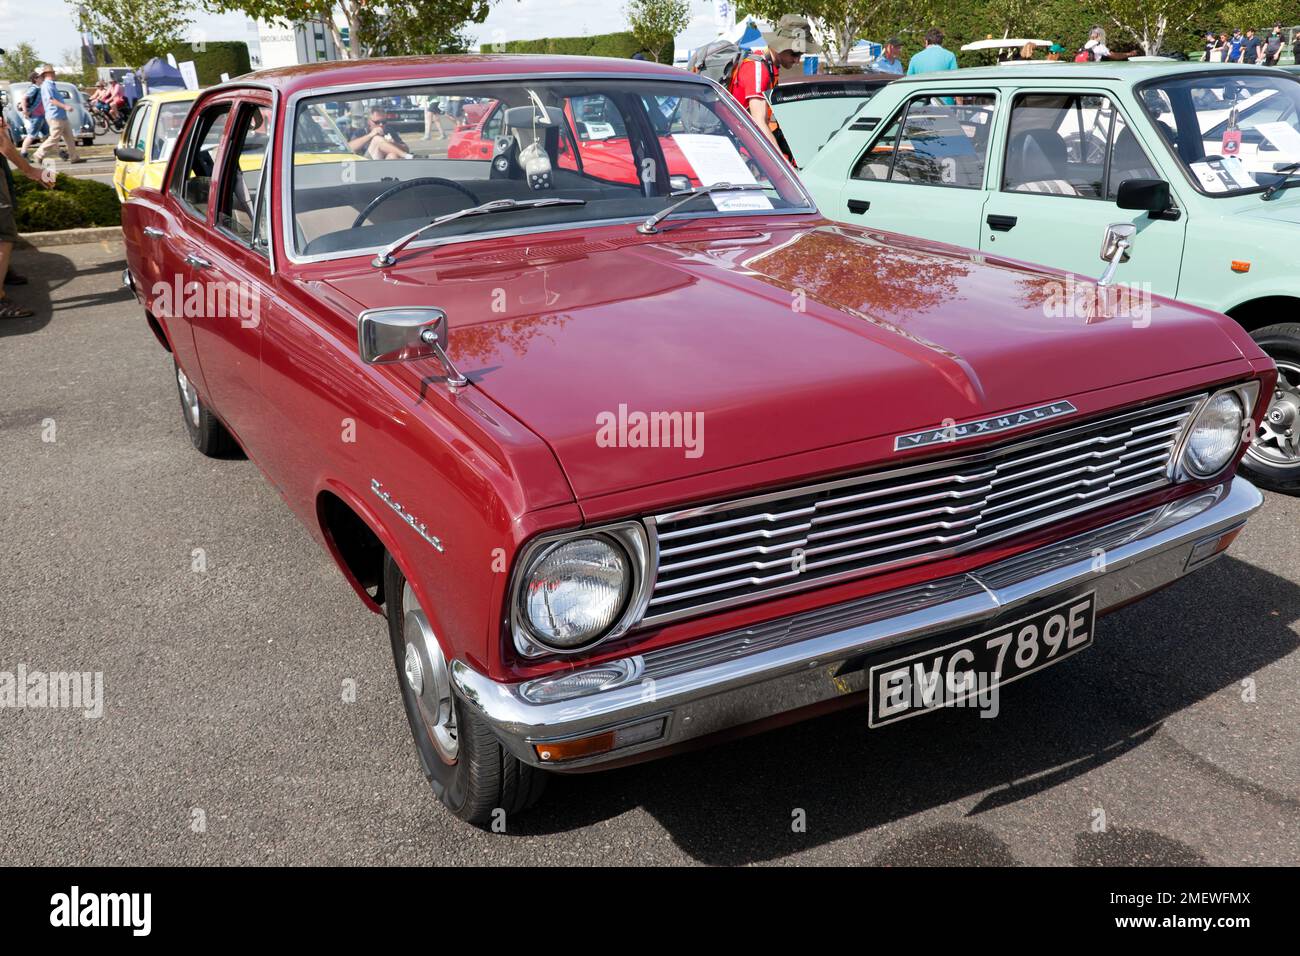 Three-quarter Front View of a Maroon, 1967, Vauxhall Cresta PC Standard, on display in a car club zone at the 2022 Silverstone Classic Stock Photo